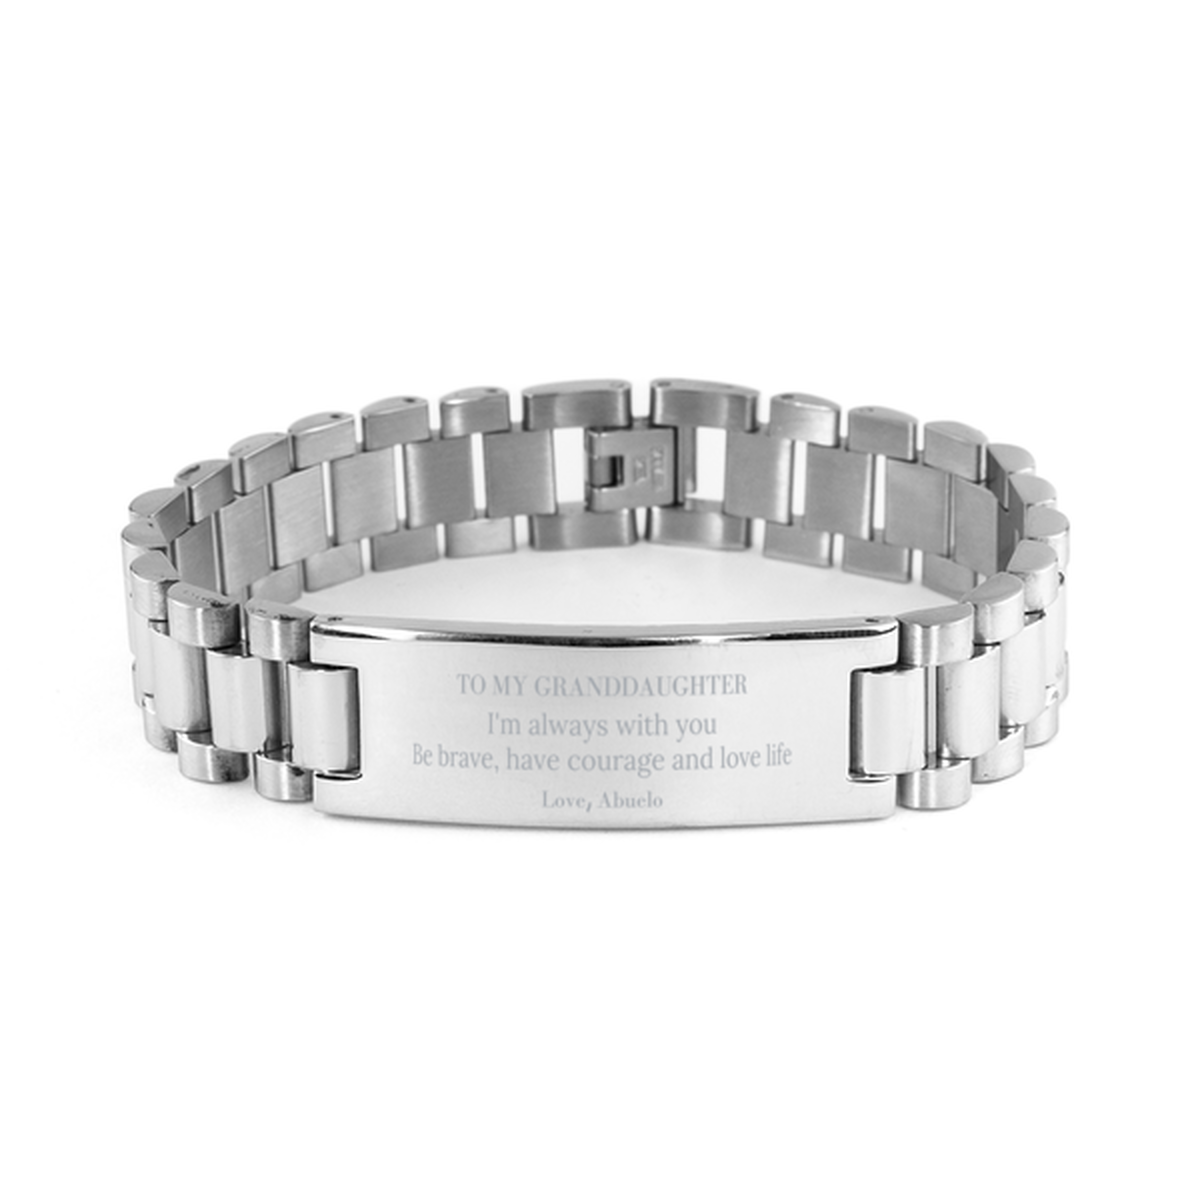 To My Granddaughter Gifts from Abuelo, Unique Ladder Stainless Steel Bracelet Inspirational Christmas Birthday Graduation Gifts for Granddaughter I'm always with you. Be brave, have courage and love life. Love, Abuelo